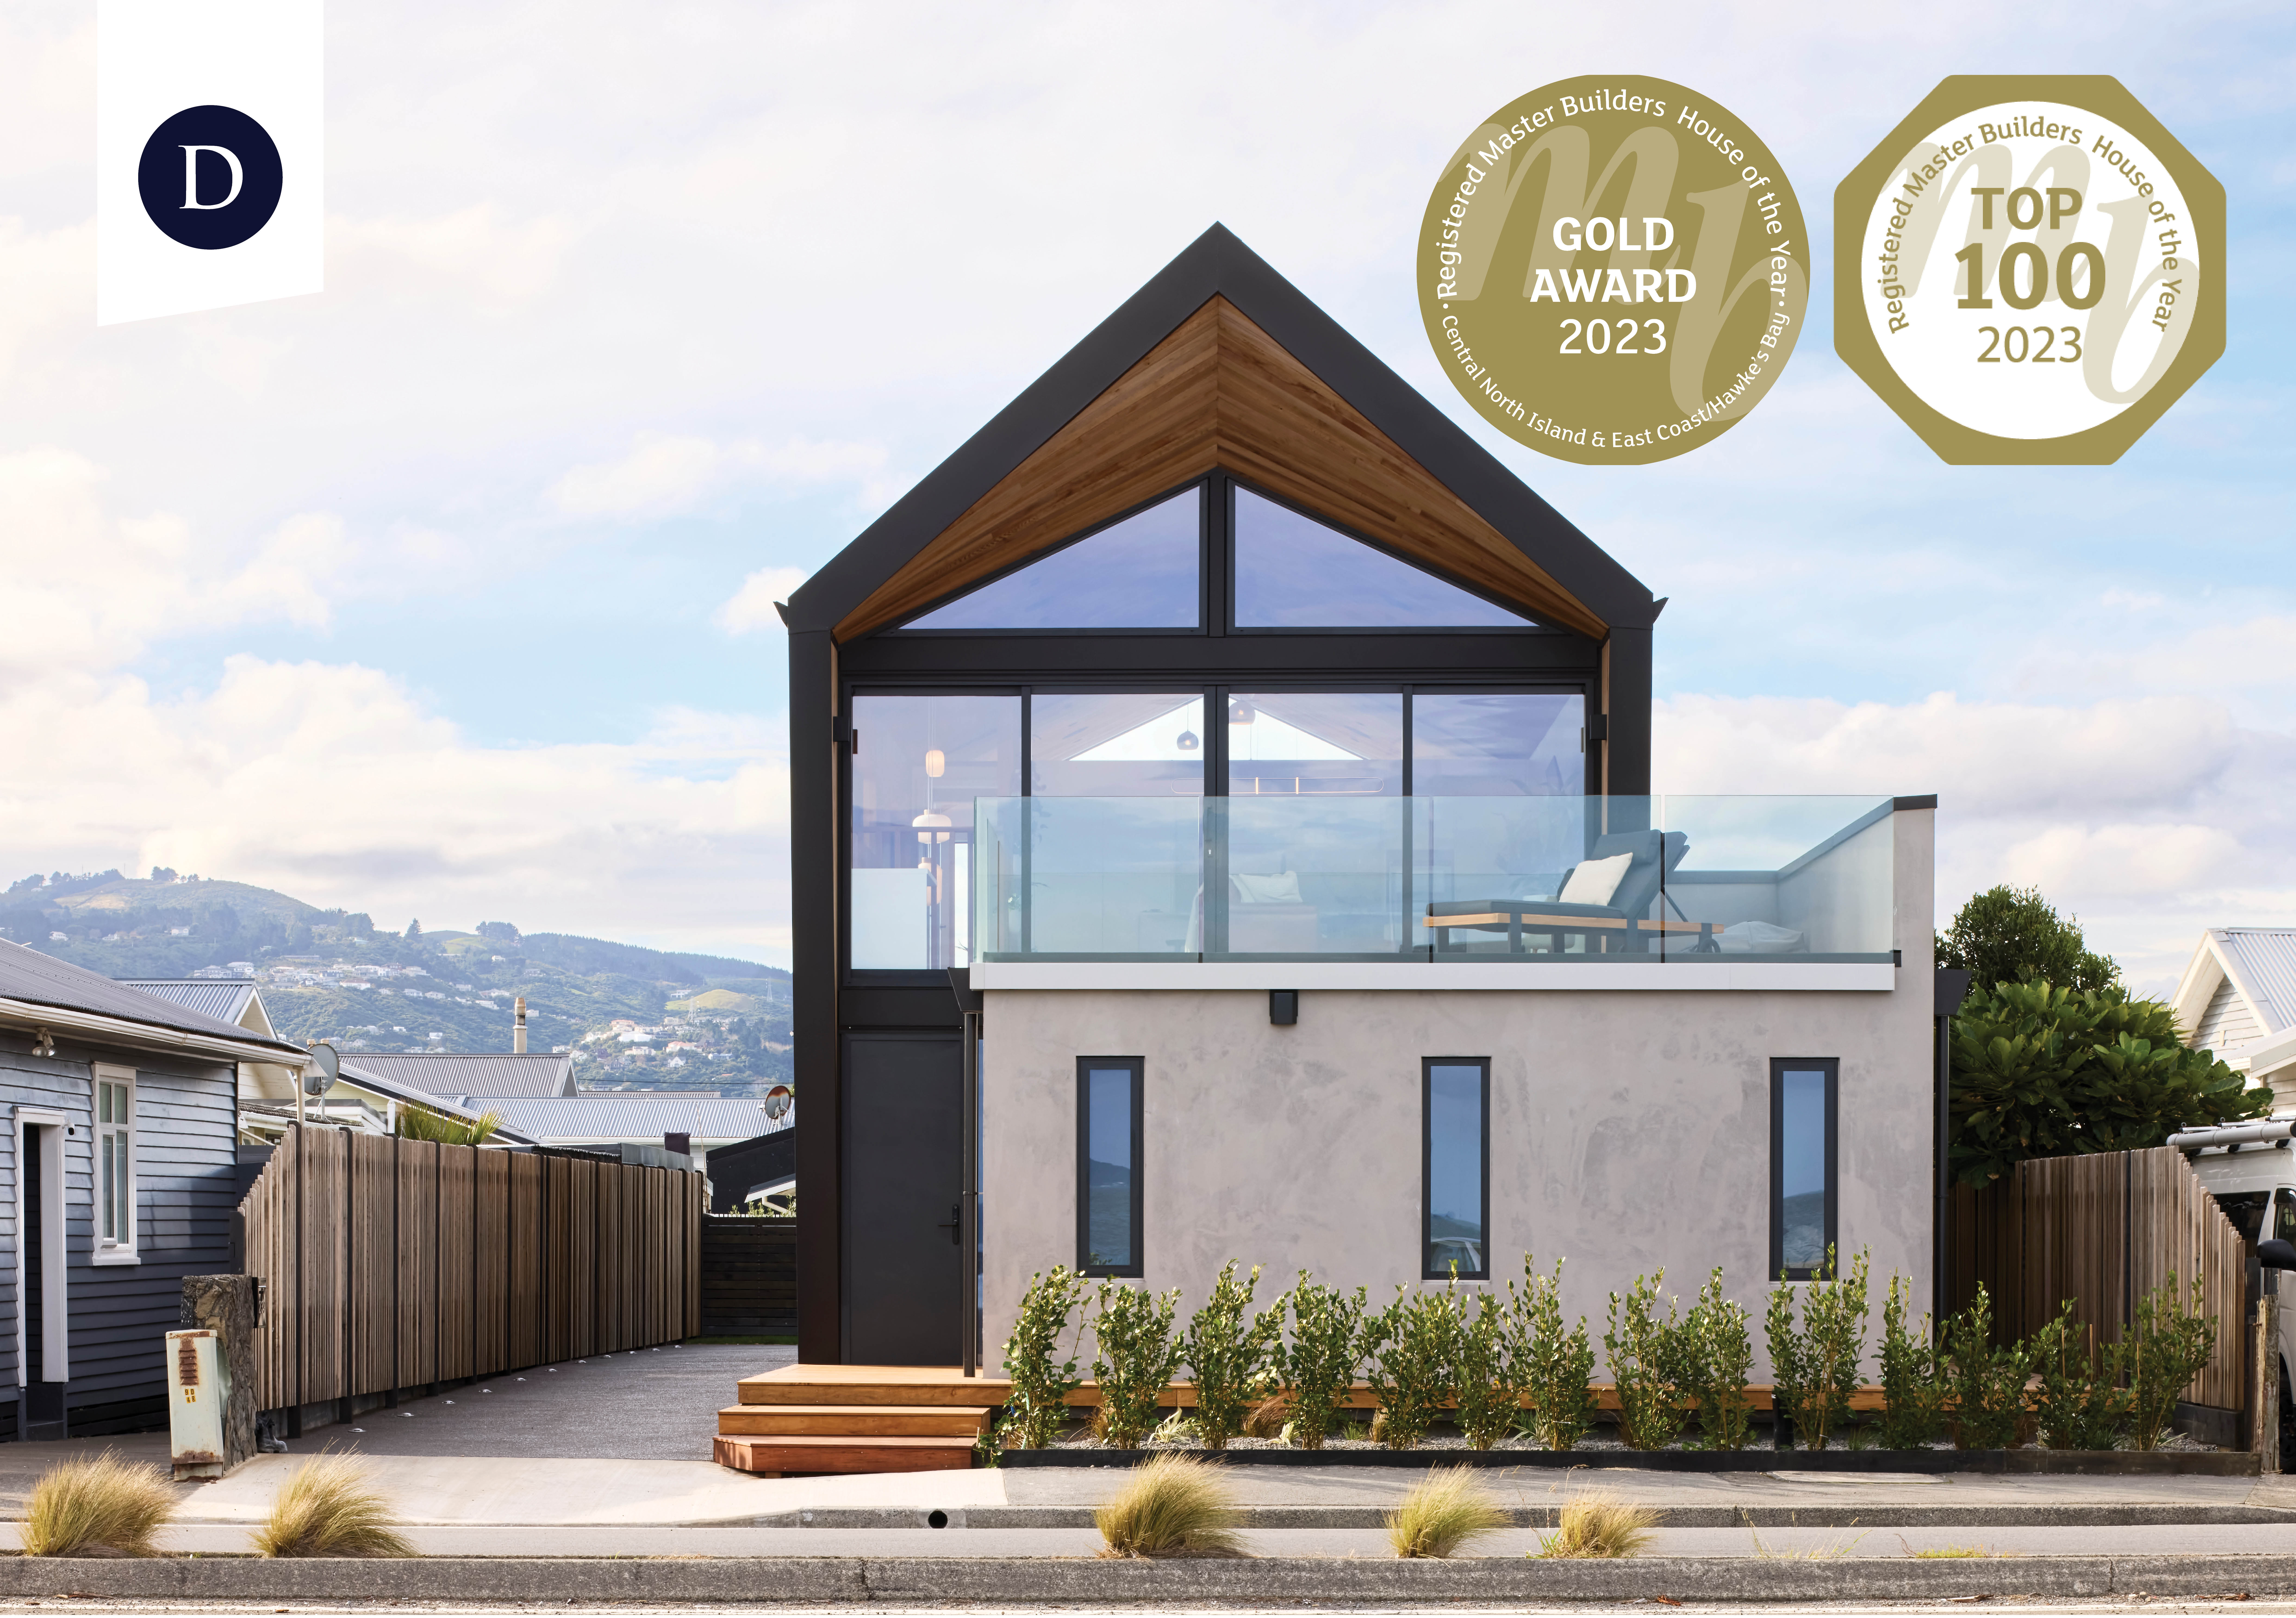 Petone Showhome is in the Top 100 House of the Year